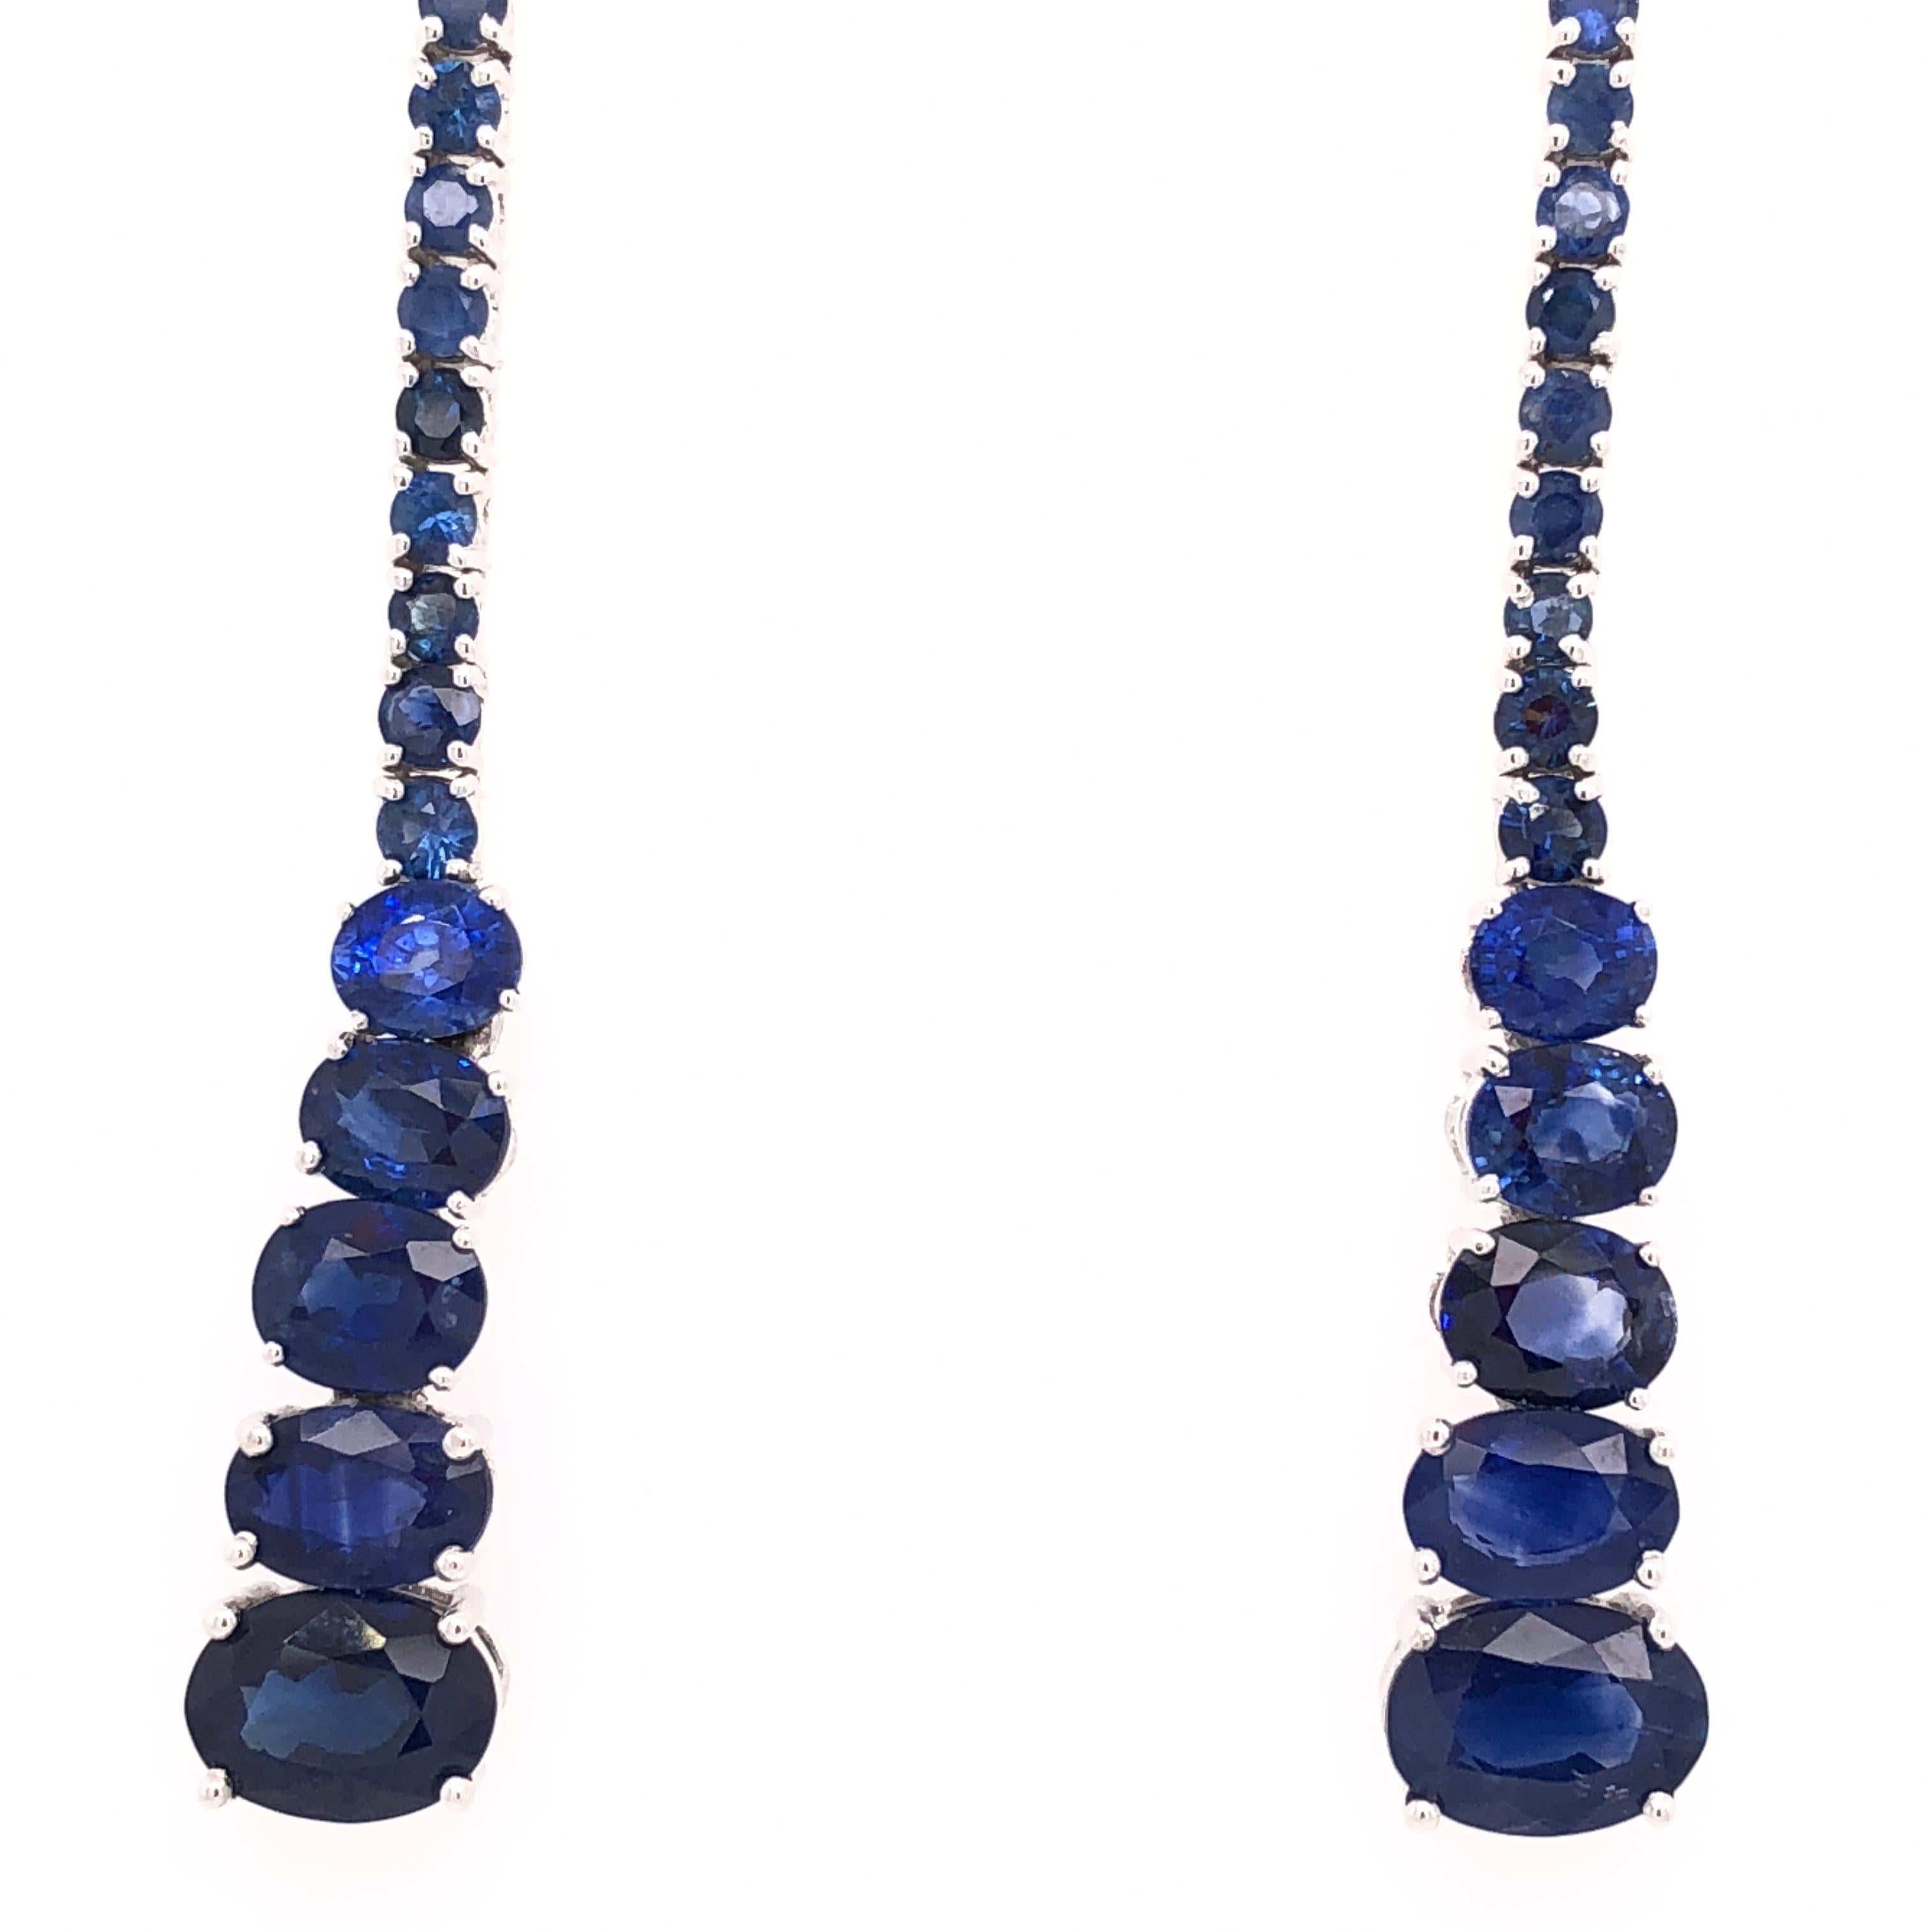 Midnight Blue Collection

Oval Sapphire gradient drop earrings set in 18K white gold. 

Blue Sapphires: 7.74ct total weight.
Width - is approximately 0.6cm/0.23inches.
Height - is approximately 6.2cm/2.45inches.